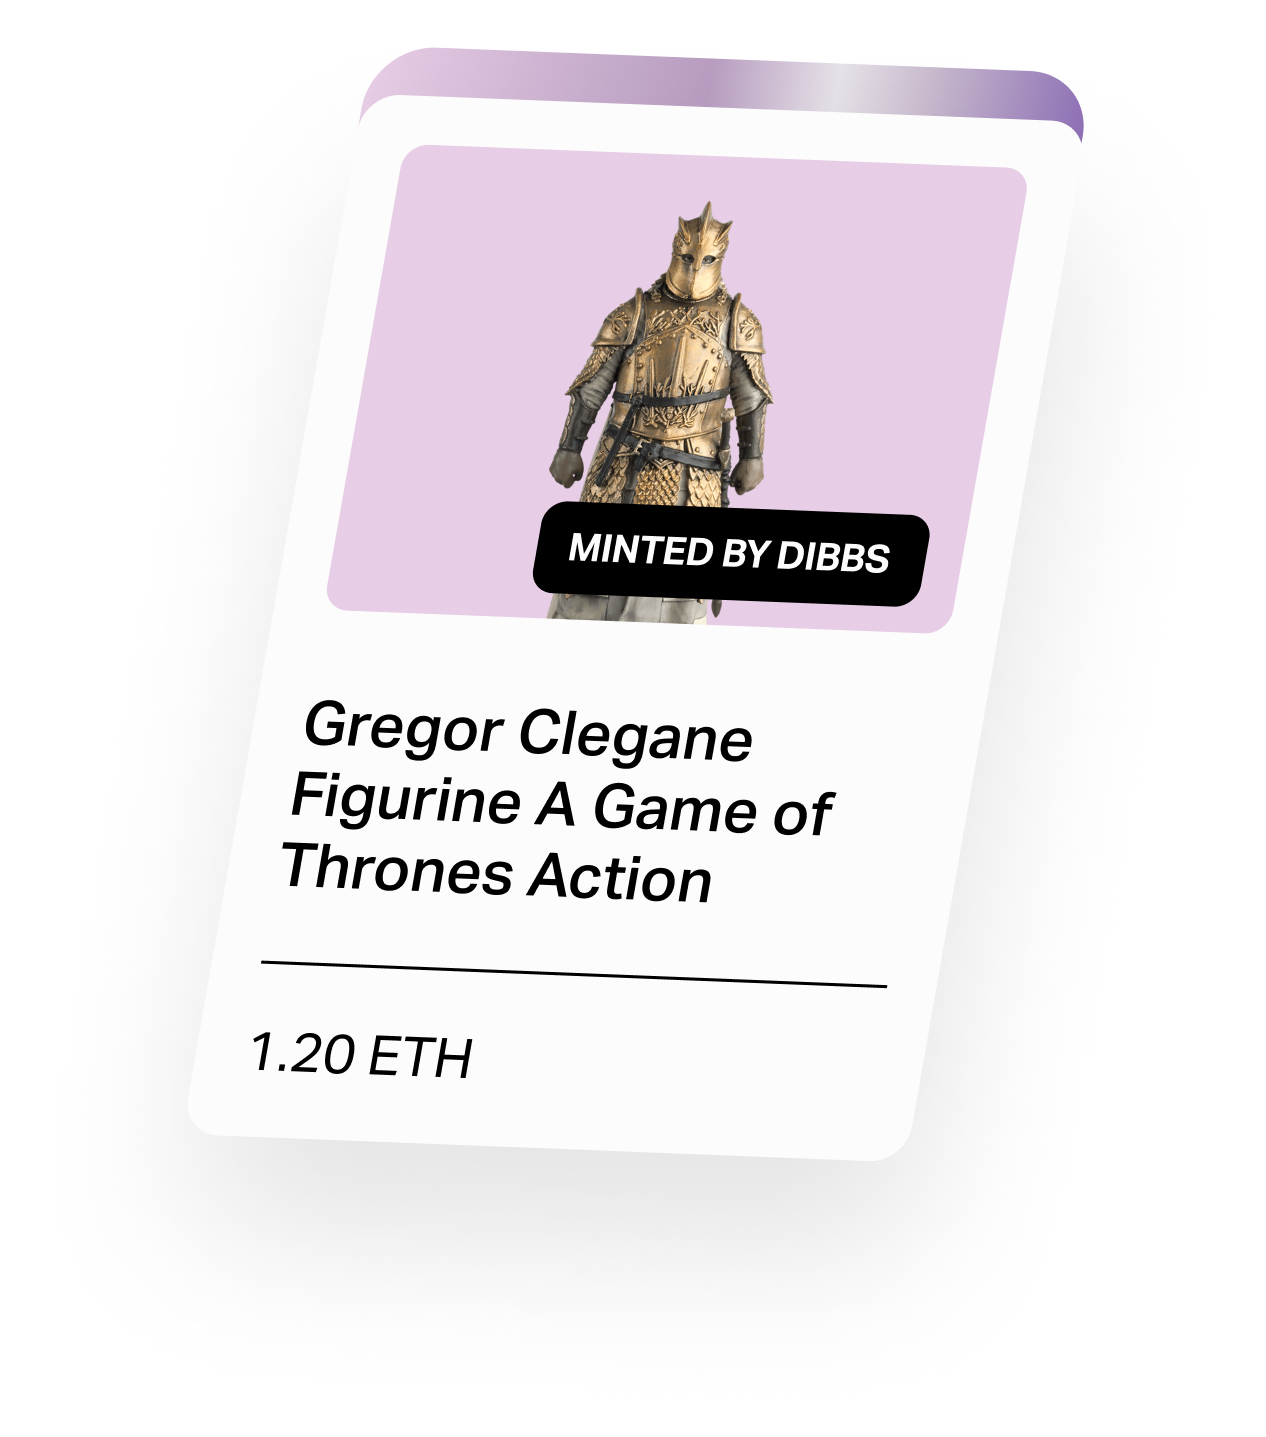 Gregor Clegane Figurine A Game of Thrones Action